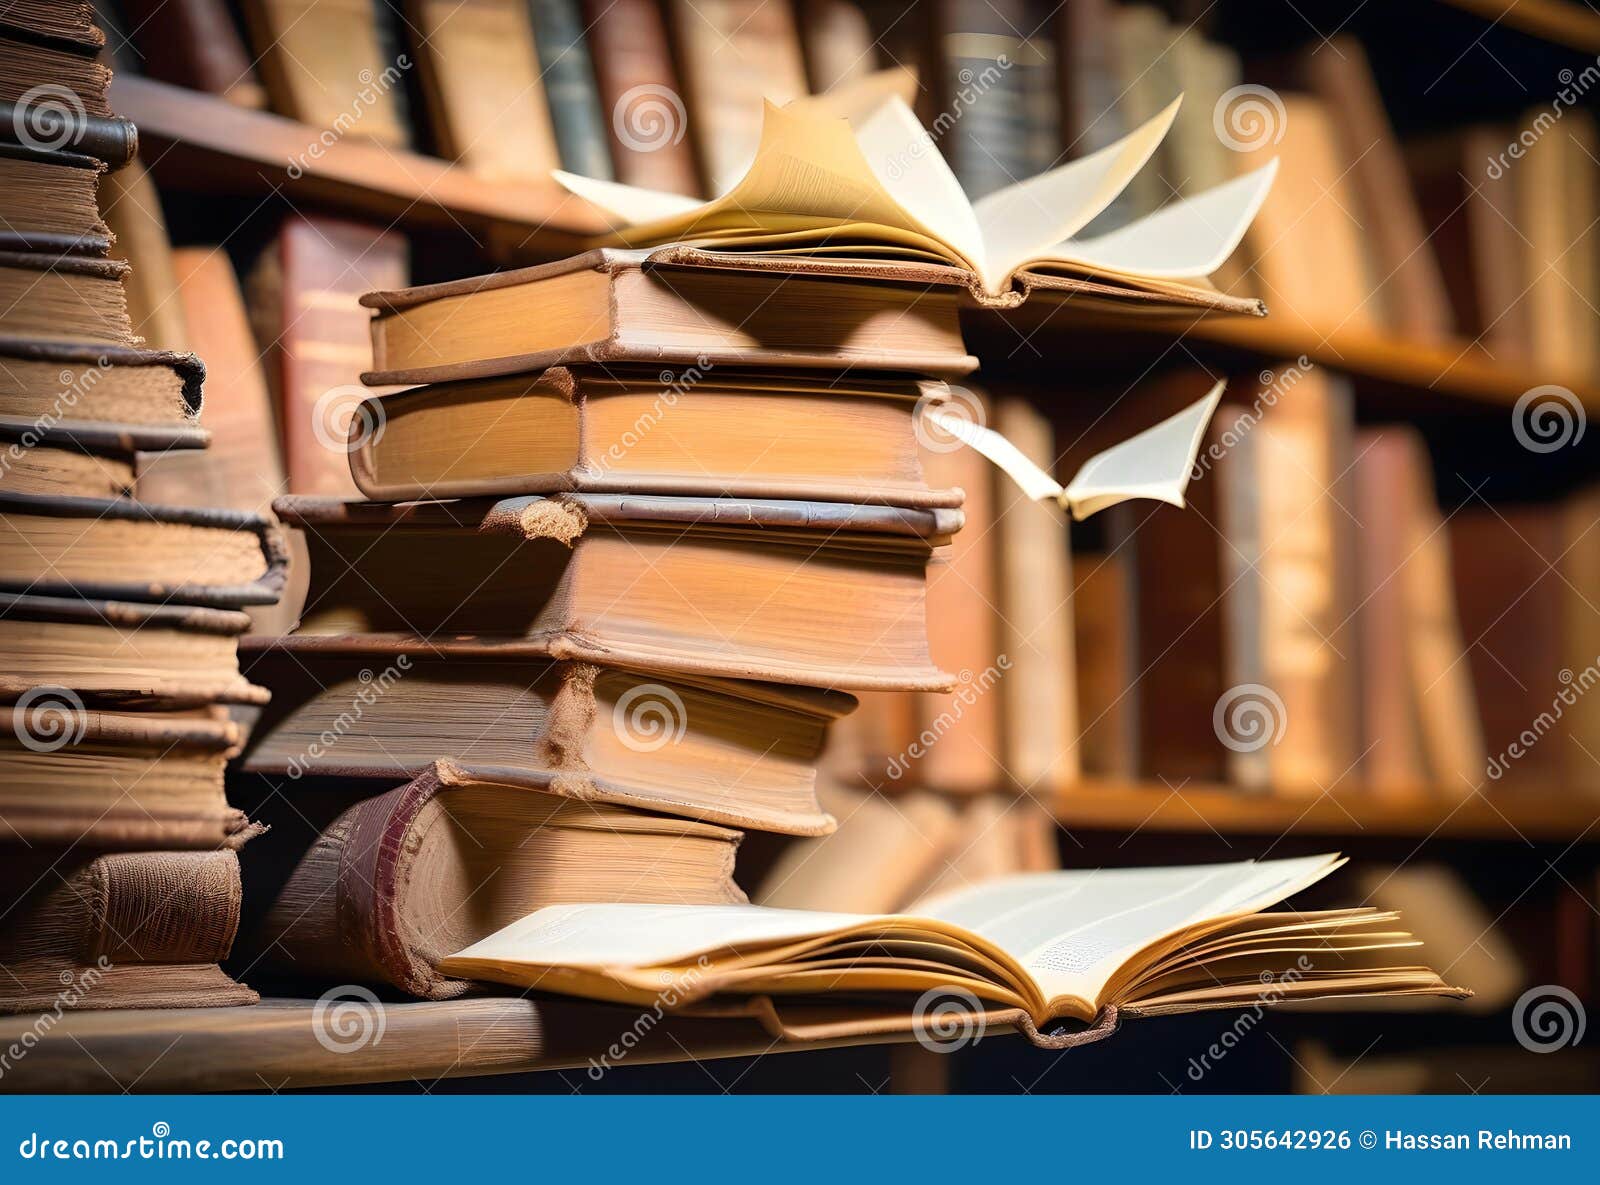 a stack of old books and flying book pages against the background of the shelves in the library